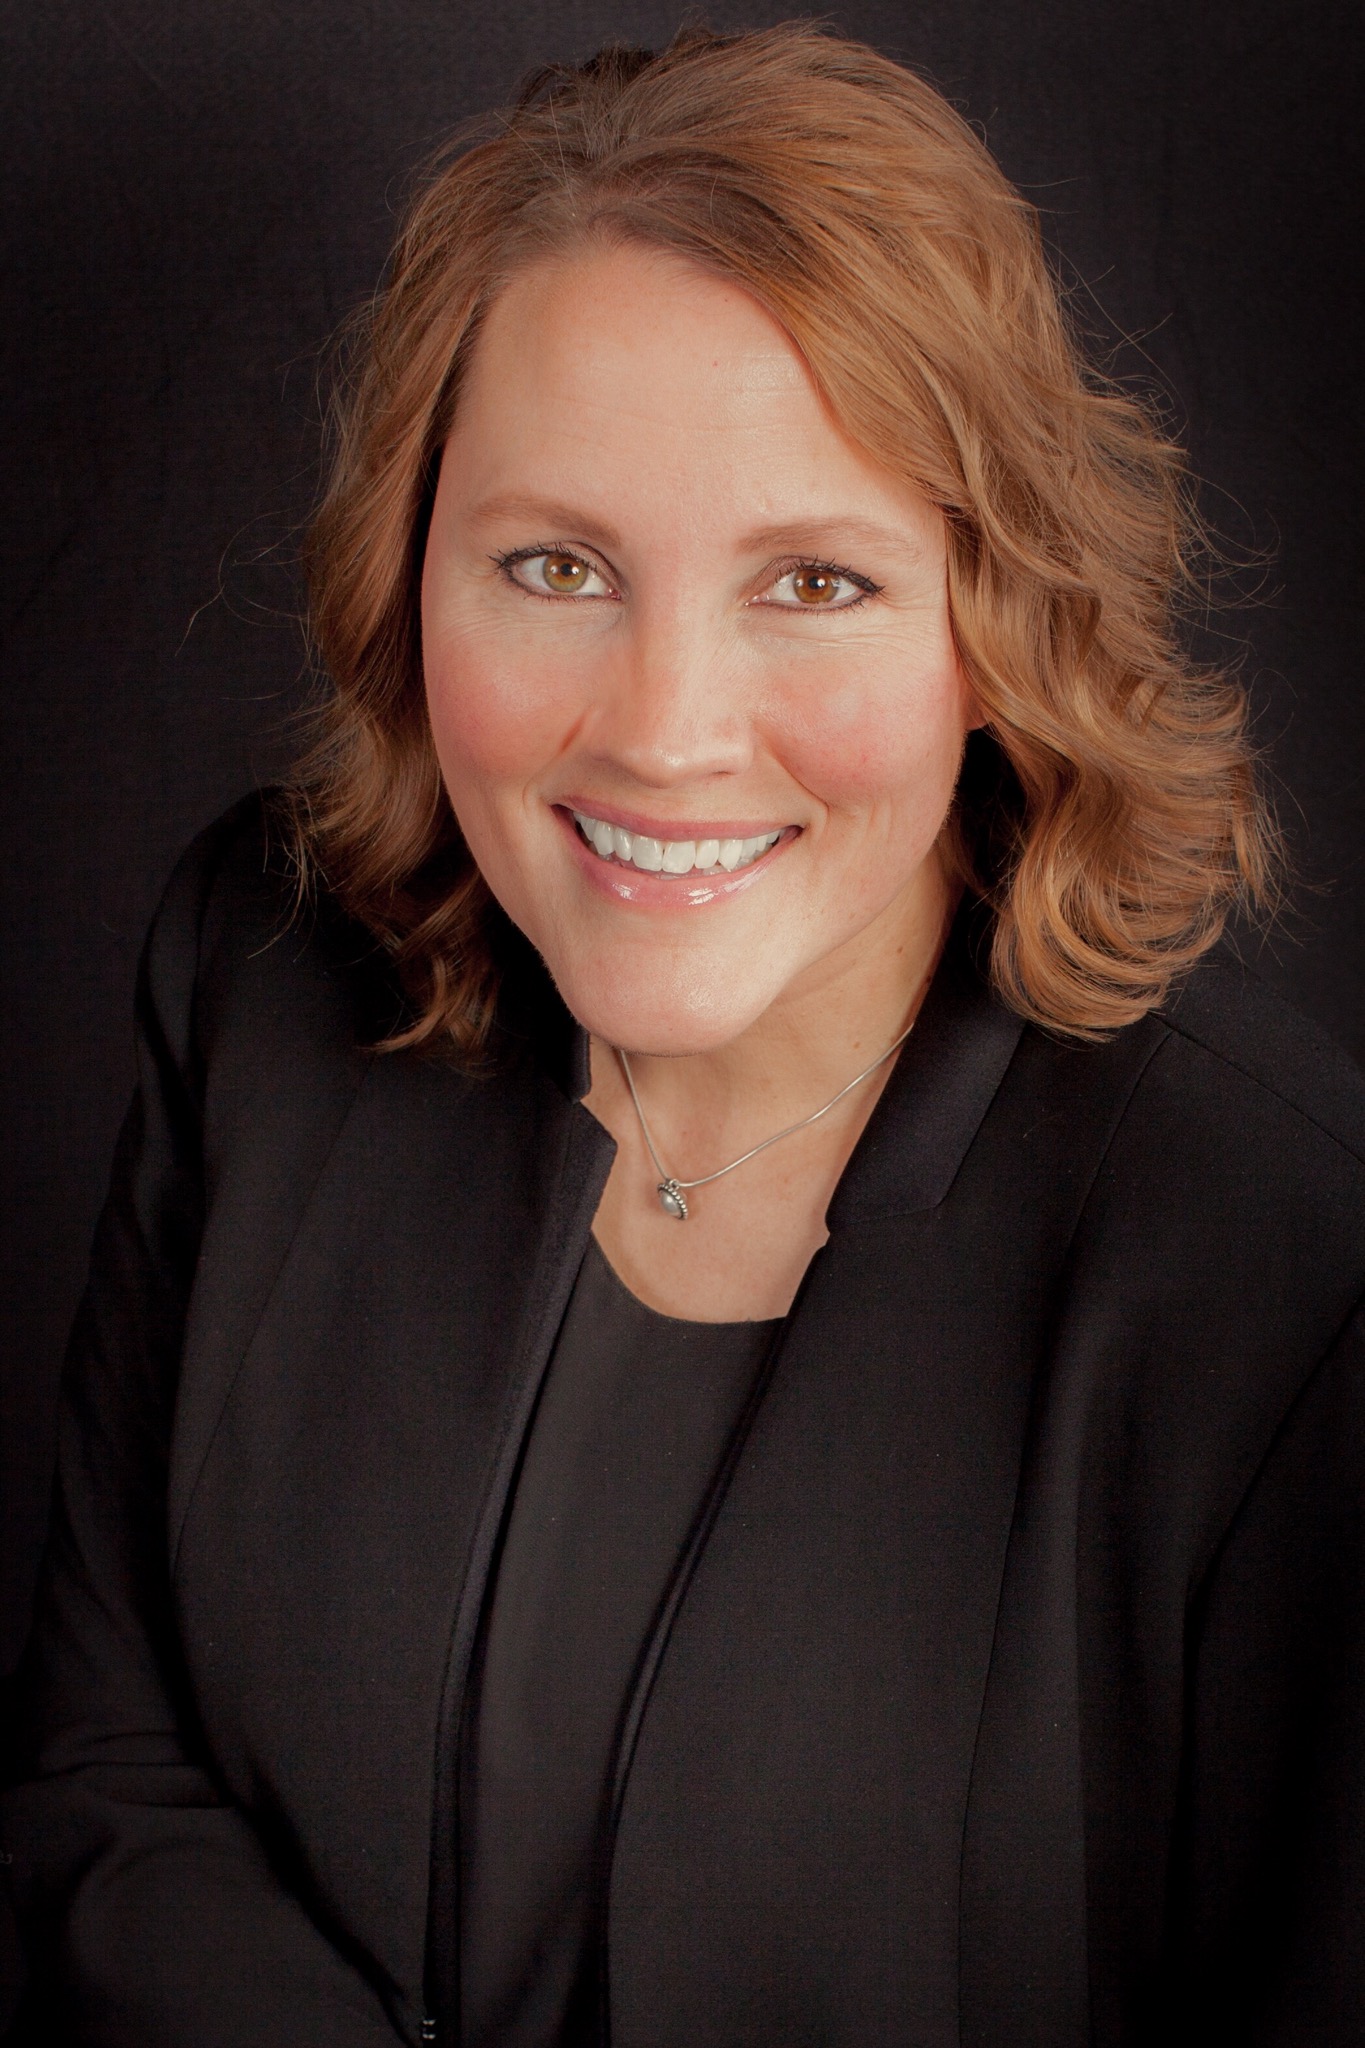 Kristi Pickering is chief operations officer at Academy Mortgage